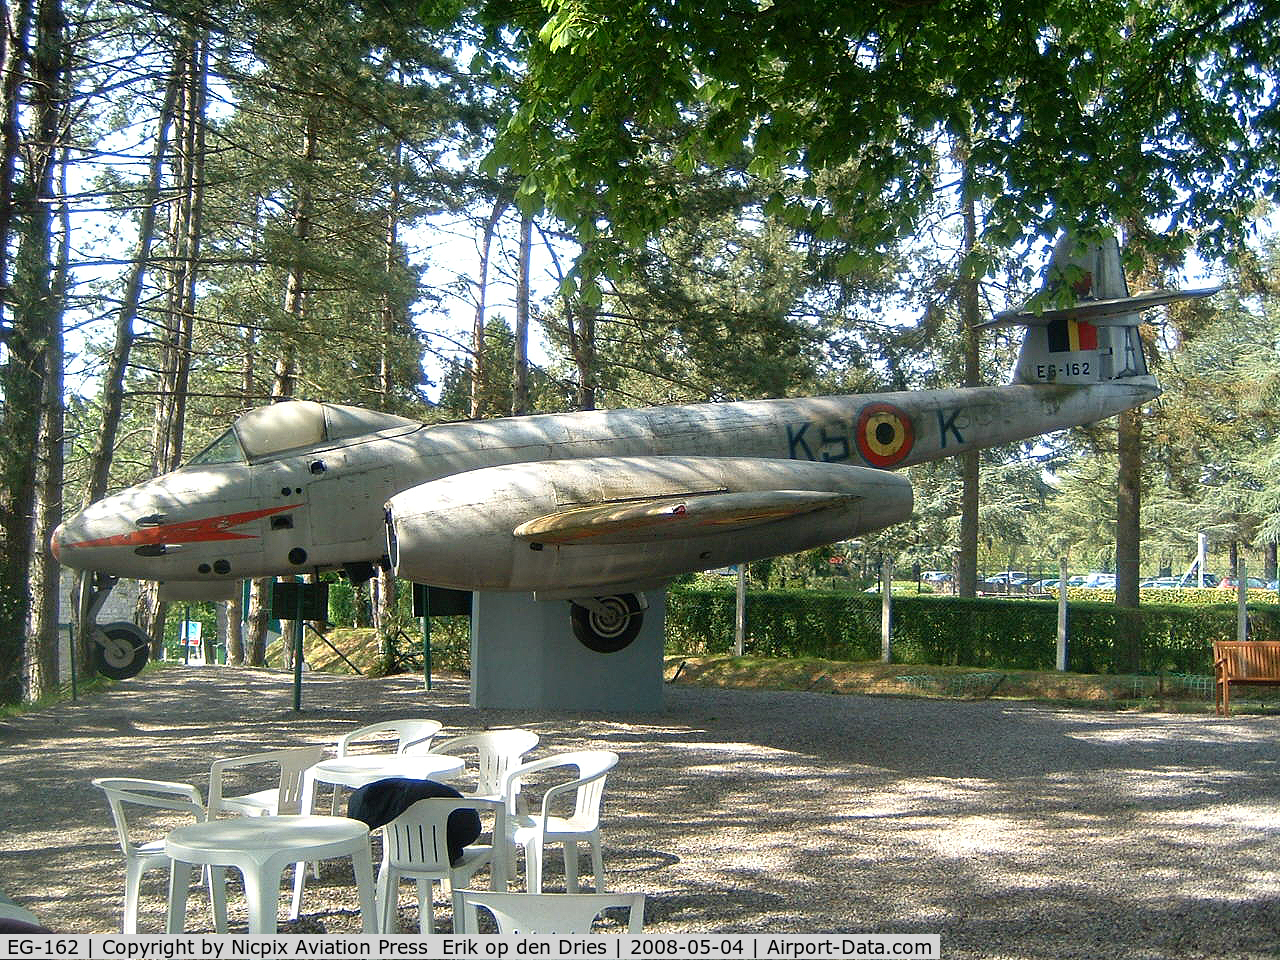 EG-162, Gloster Meteor F.8 C/N 6496, EG-162 is preserved on the terrace of a restuarant near the citadel of Dinant.